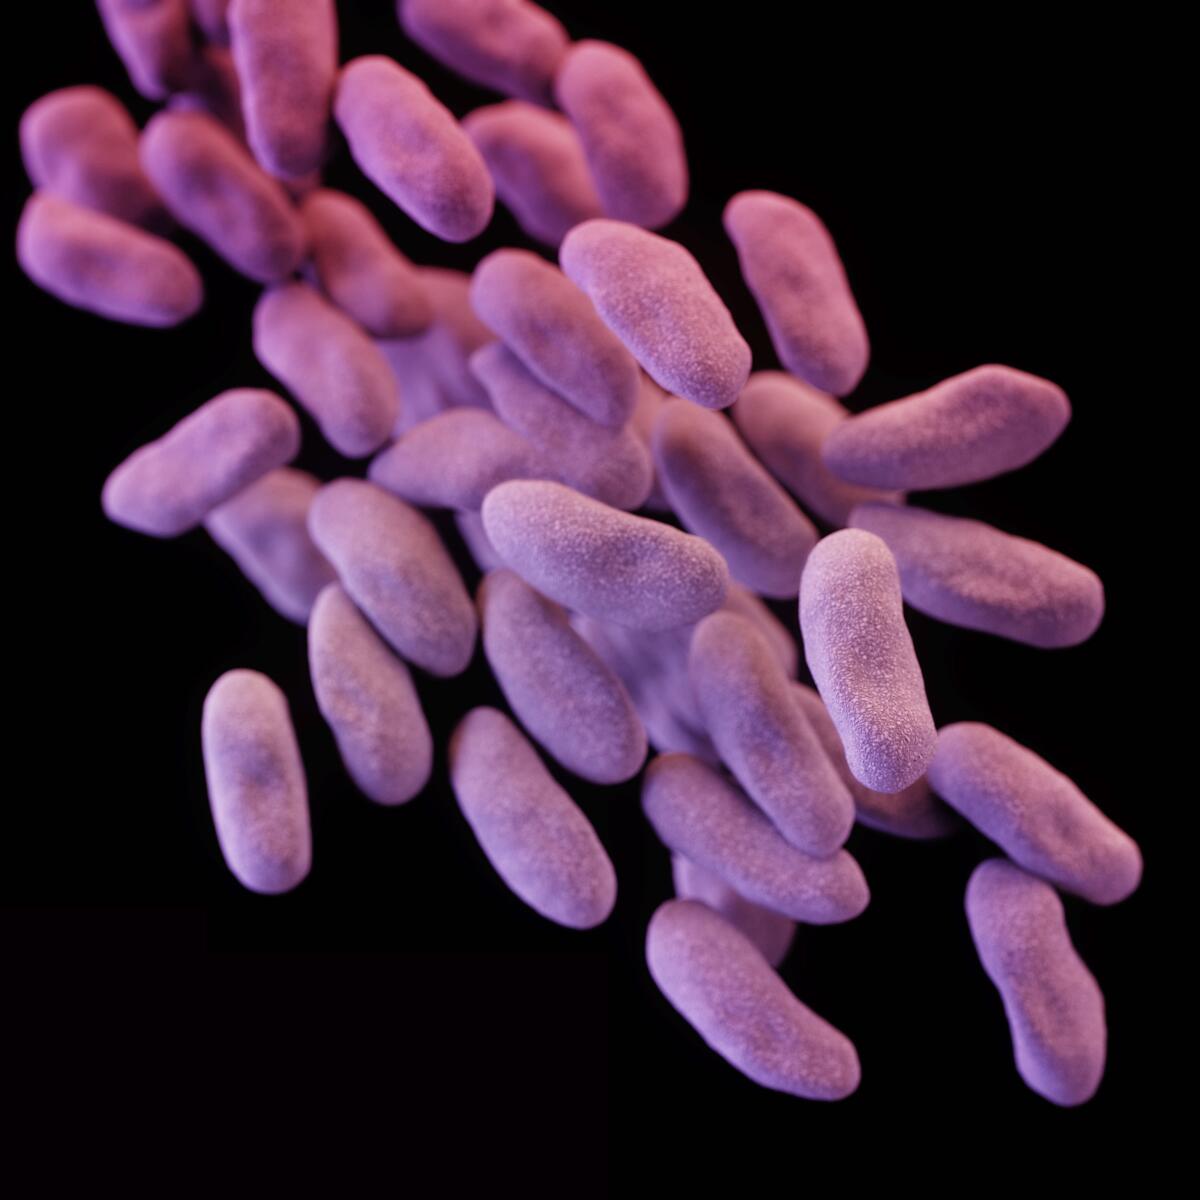 Purple, elongated spheres of bacteria on a black background.